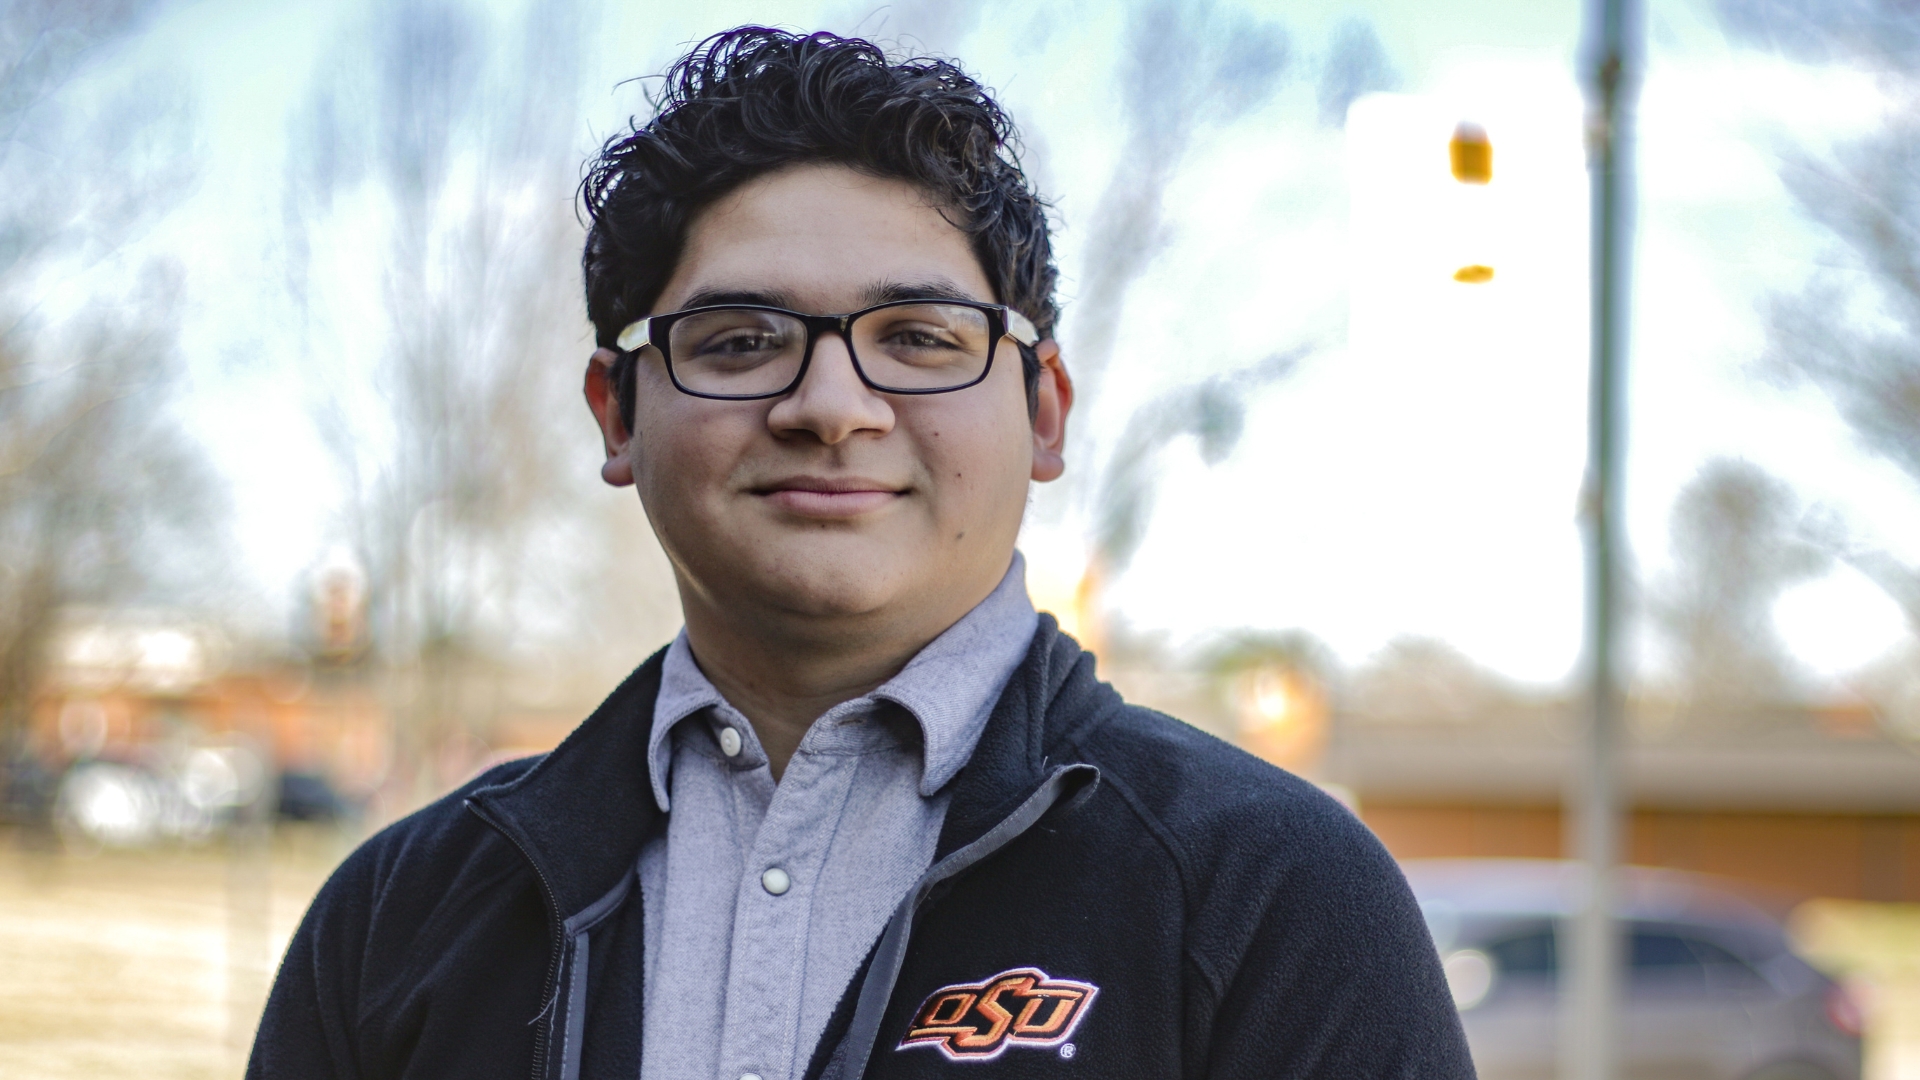 Uniting IT Students: OSUIT's Carlos Arevalo Named 2023 Newman Civic Fellow Wednesday, April 12, 2023